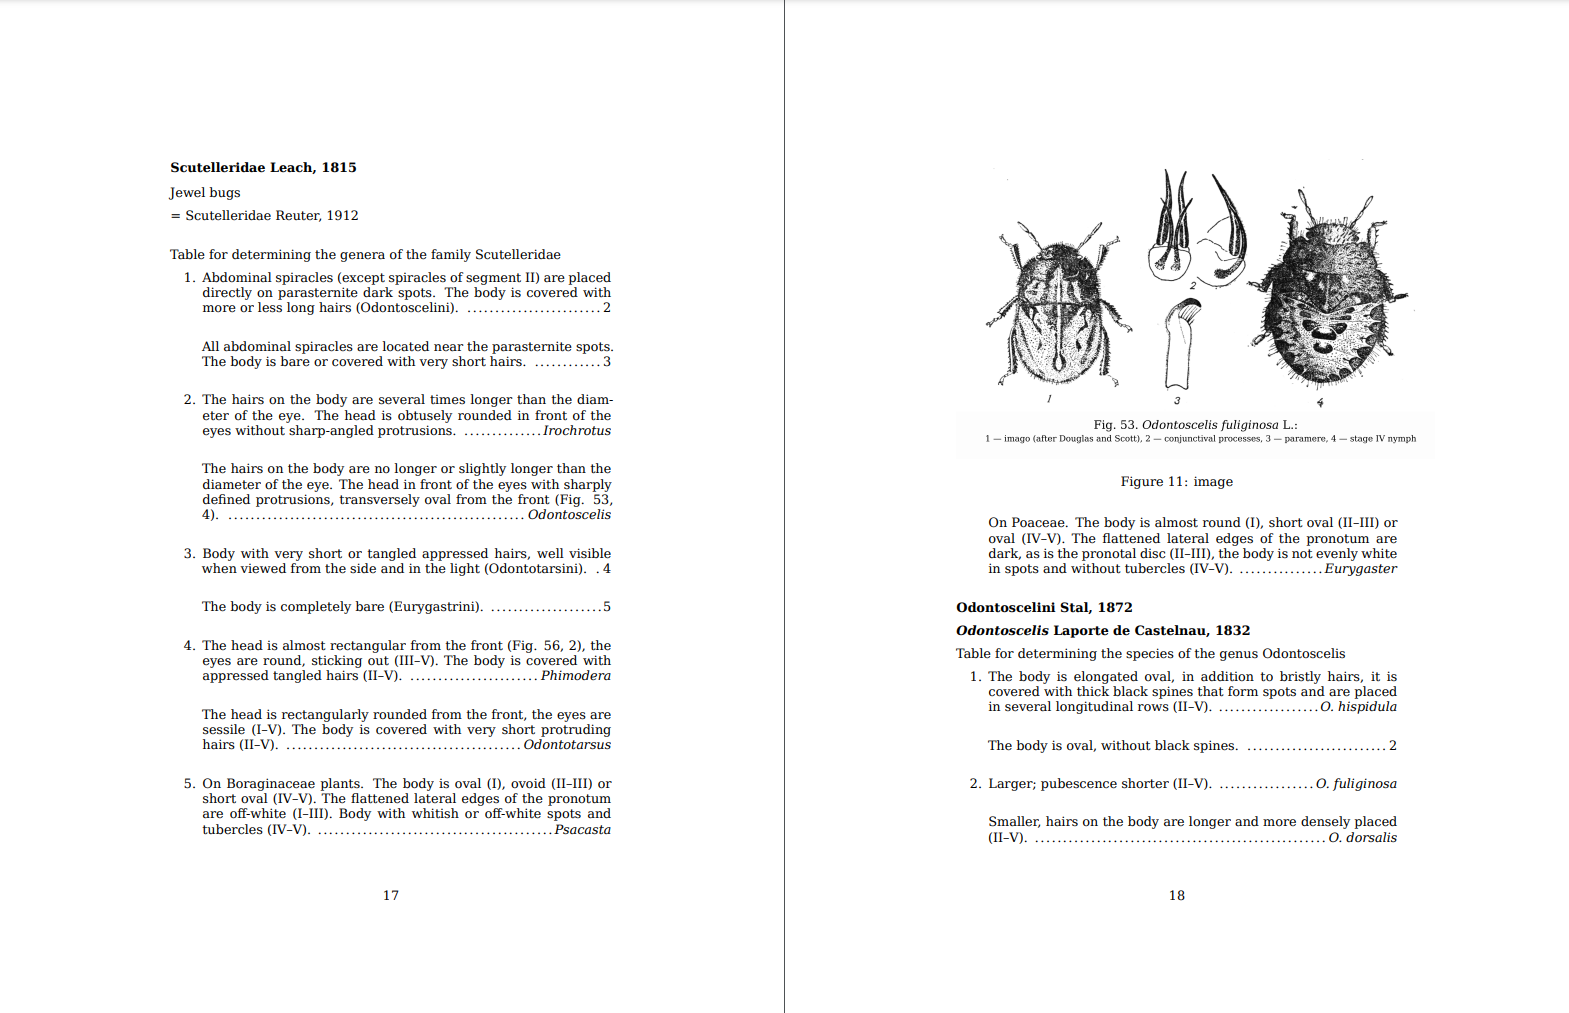 Screenshot of page 17 and 18 of a document showing a key to the genera of Scutelleridae, a drawing of Odontoscelis fuliginosus, and the start of a key to Odontoscelis.